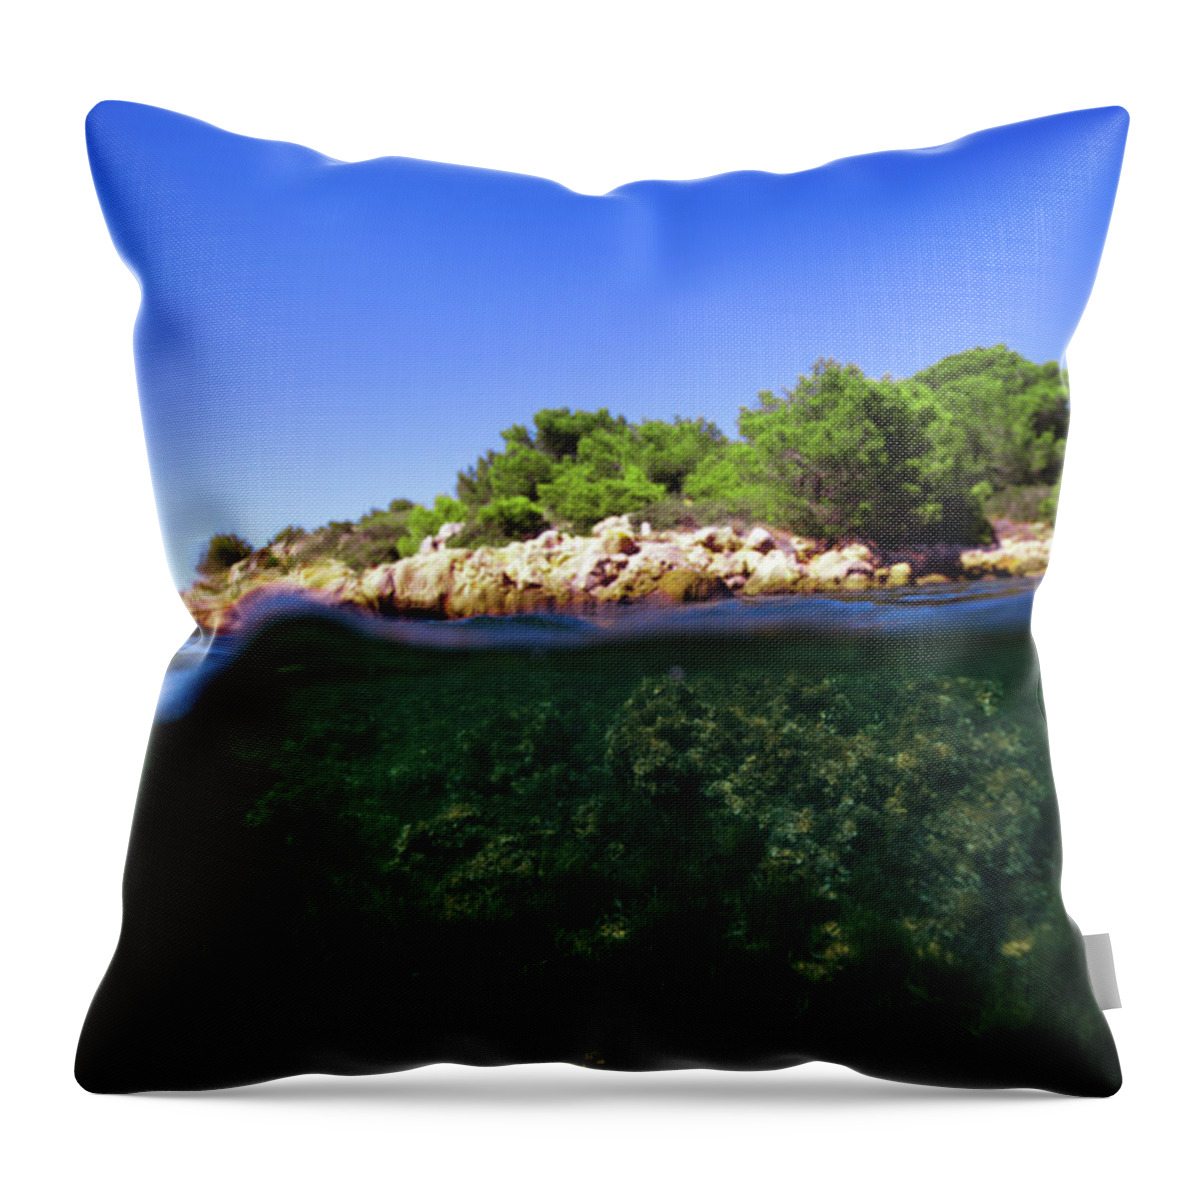 Underwater Throw Pillow featuring the photograph Underwater Life by Gemma Silvestre